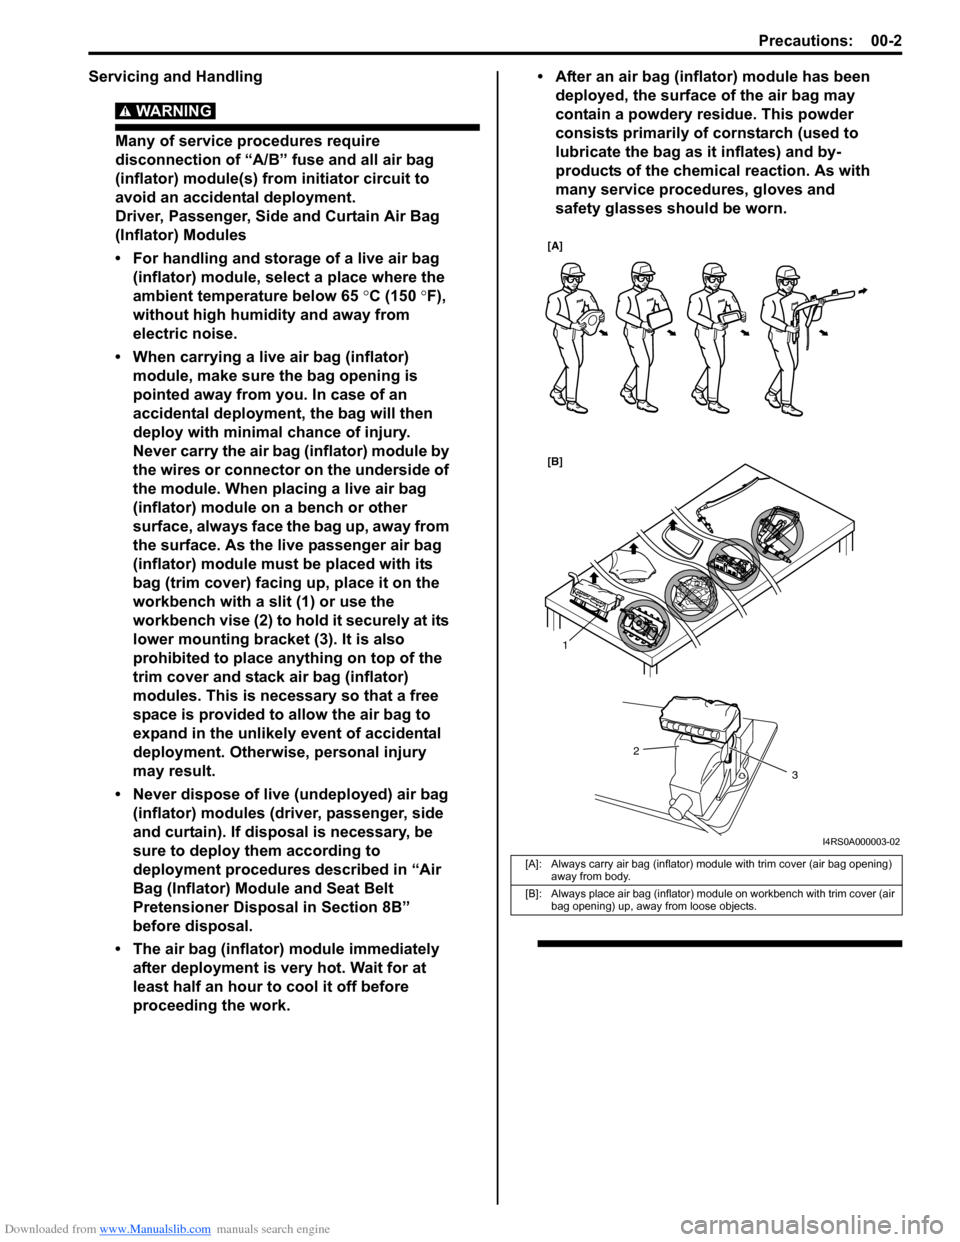 SUZUKI SX4 2006 1.G Service Workshop Manual Downloaded from www.Manualslib.com manuals search engine Precautions: 00-2
Servicing and Handling
WARNING! 
Many of service procedures require 
disconnection of “A/B” fuse and all air bag 
(inflat